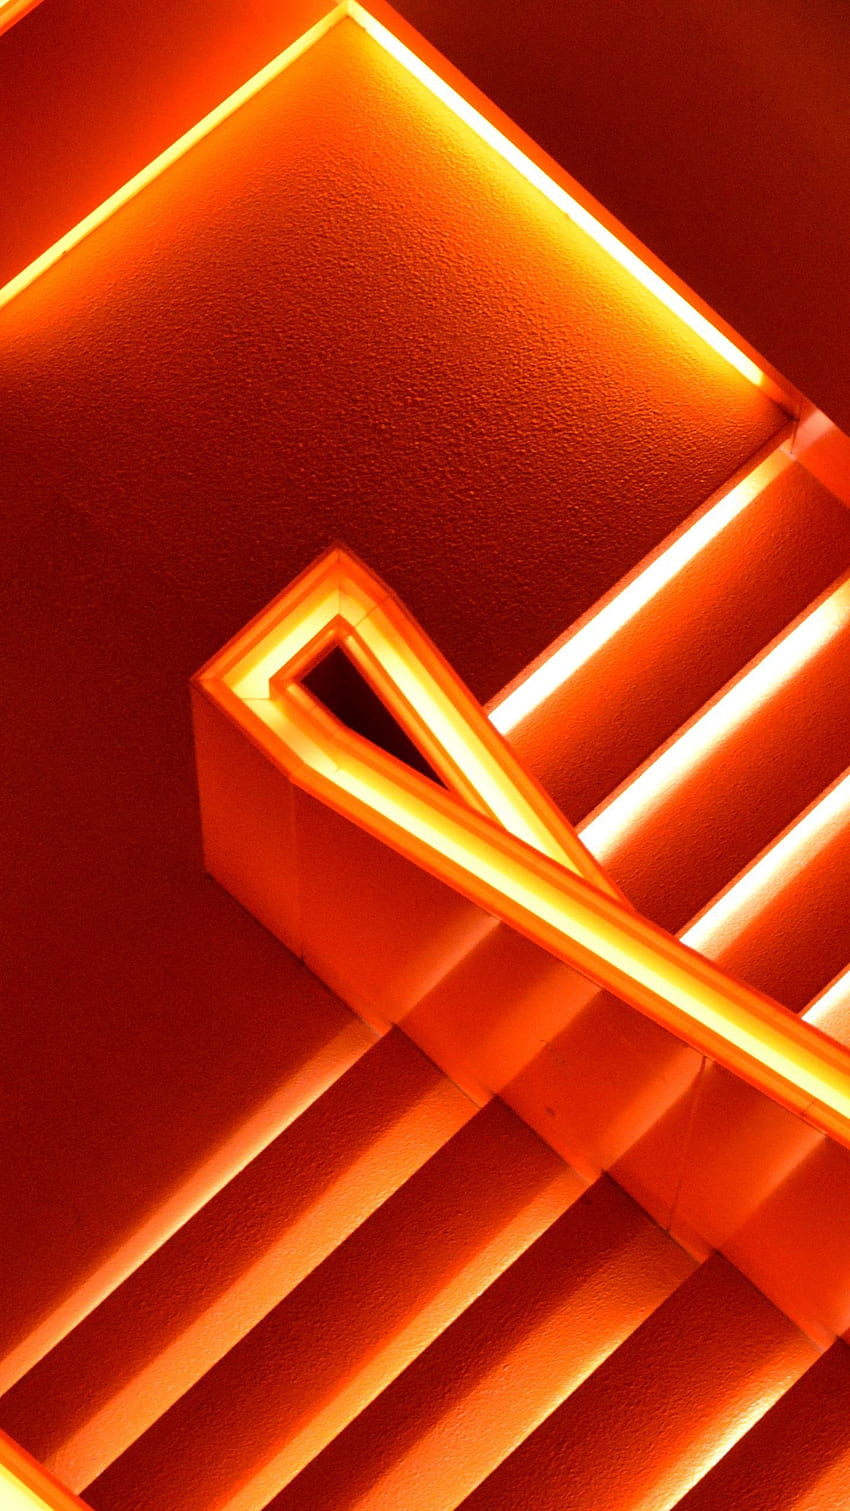 A neon sign that is orange in color - Neon orange